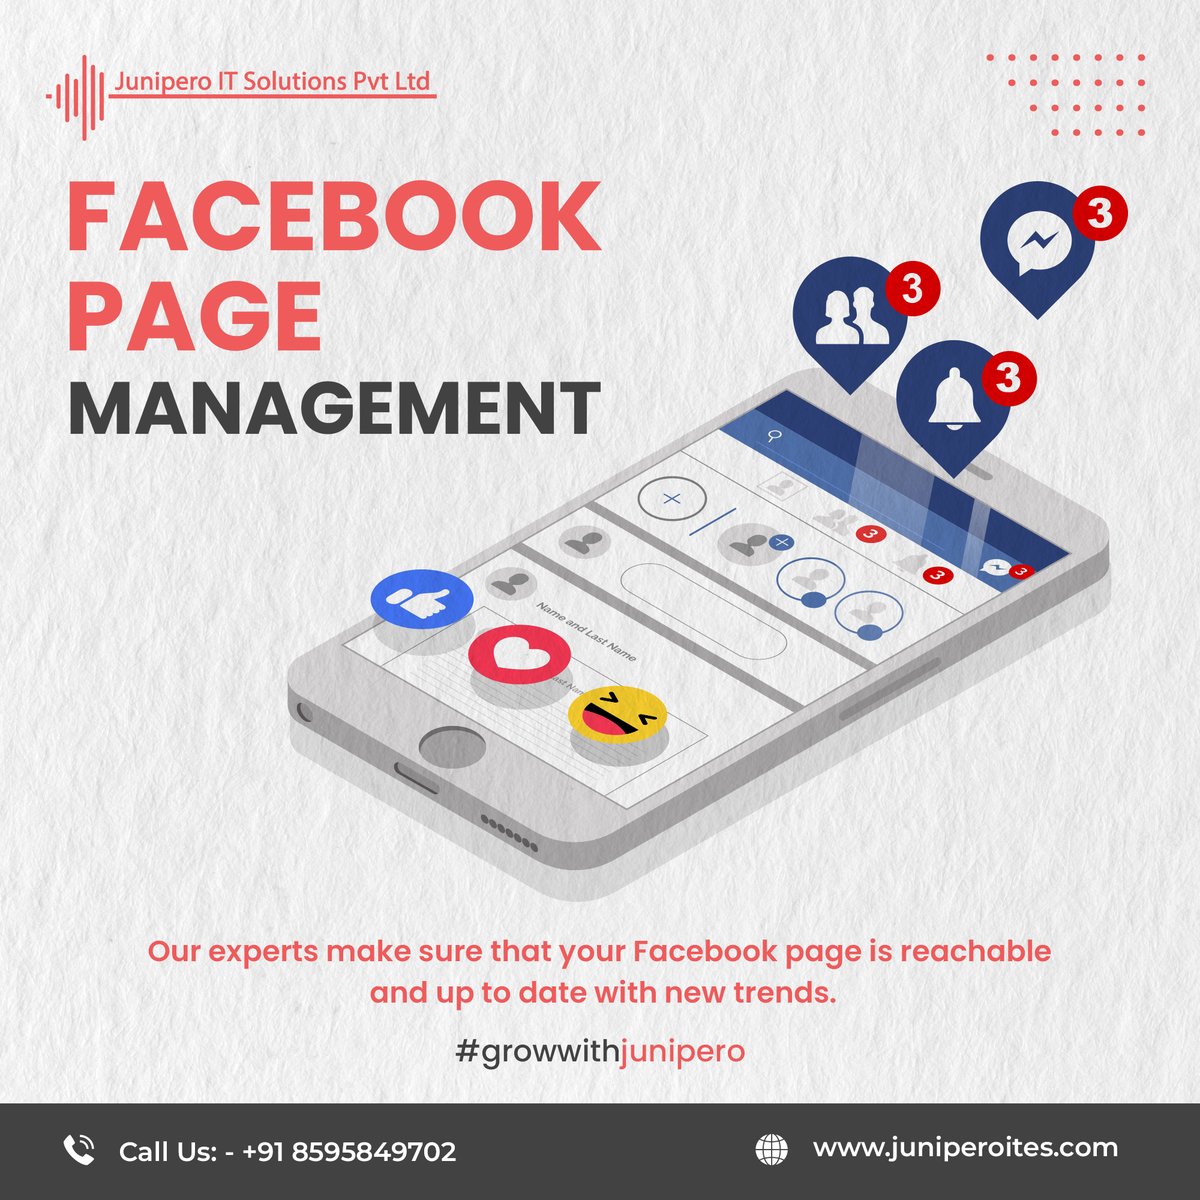 Our experts make sure that your Facebook page is reachable and up to date with new trends
-
-
-
#Facebook #page #mangement #facebookpage #pagemanagement #design #content #viral #promo #promotion #growwithjunipero